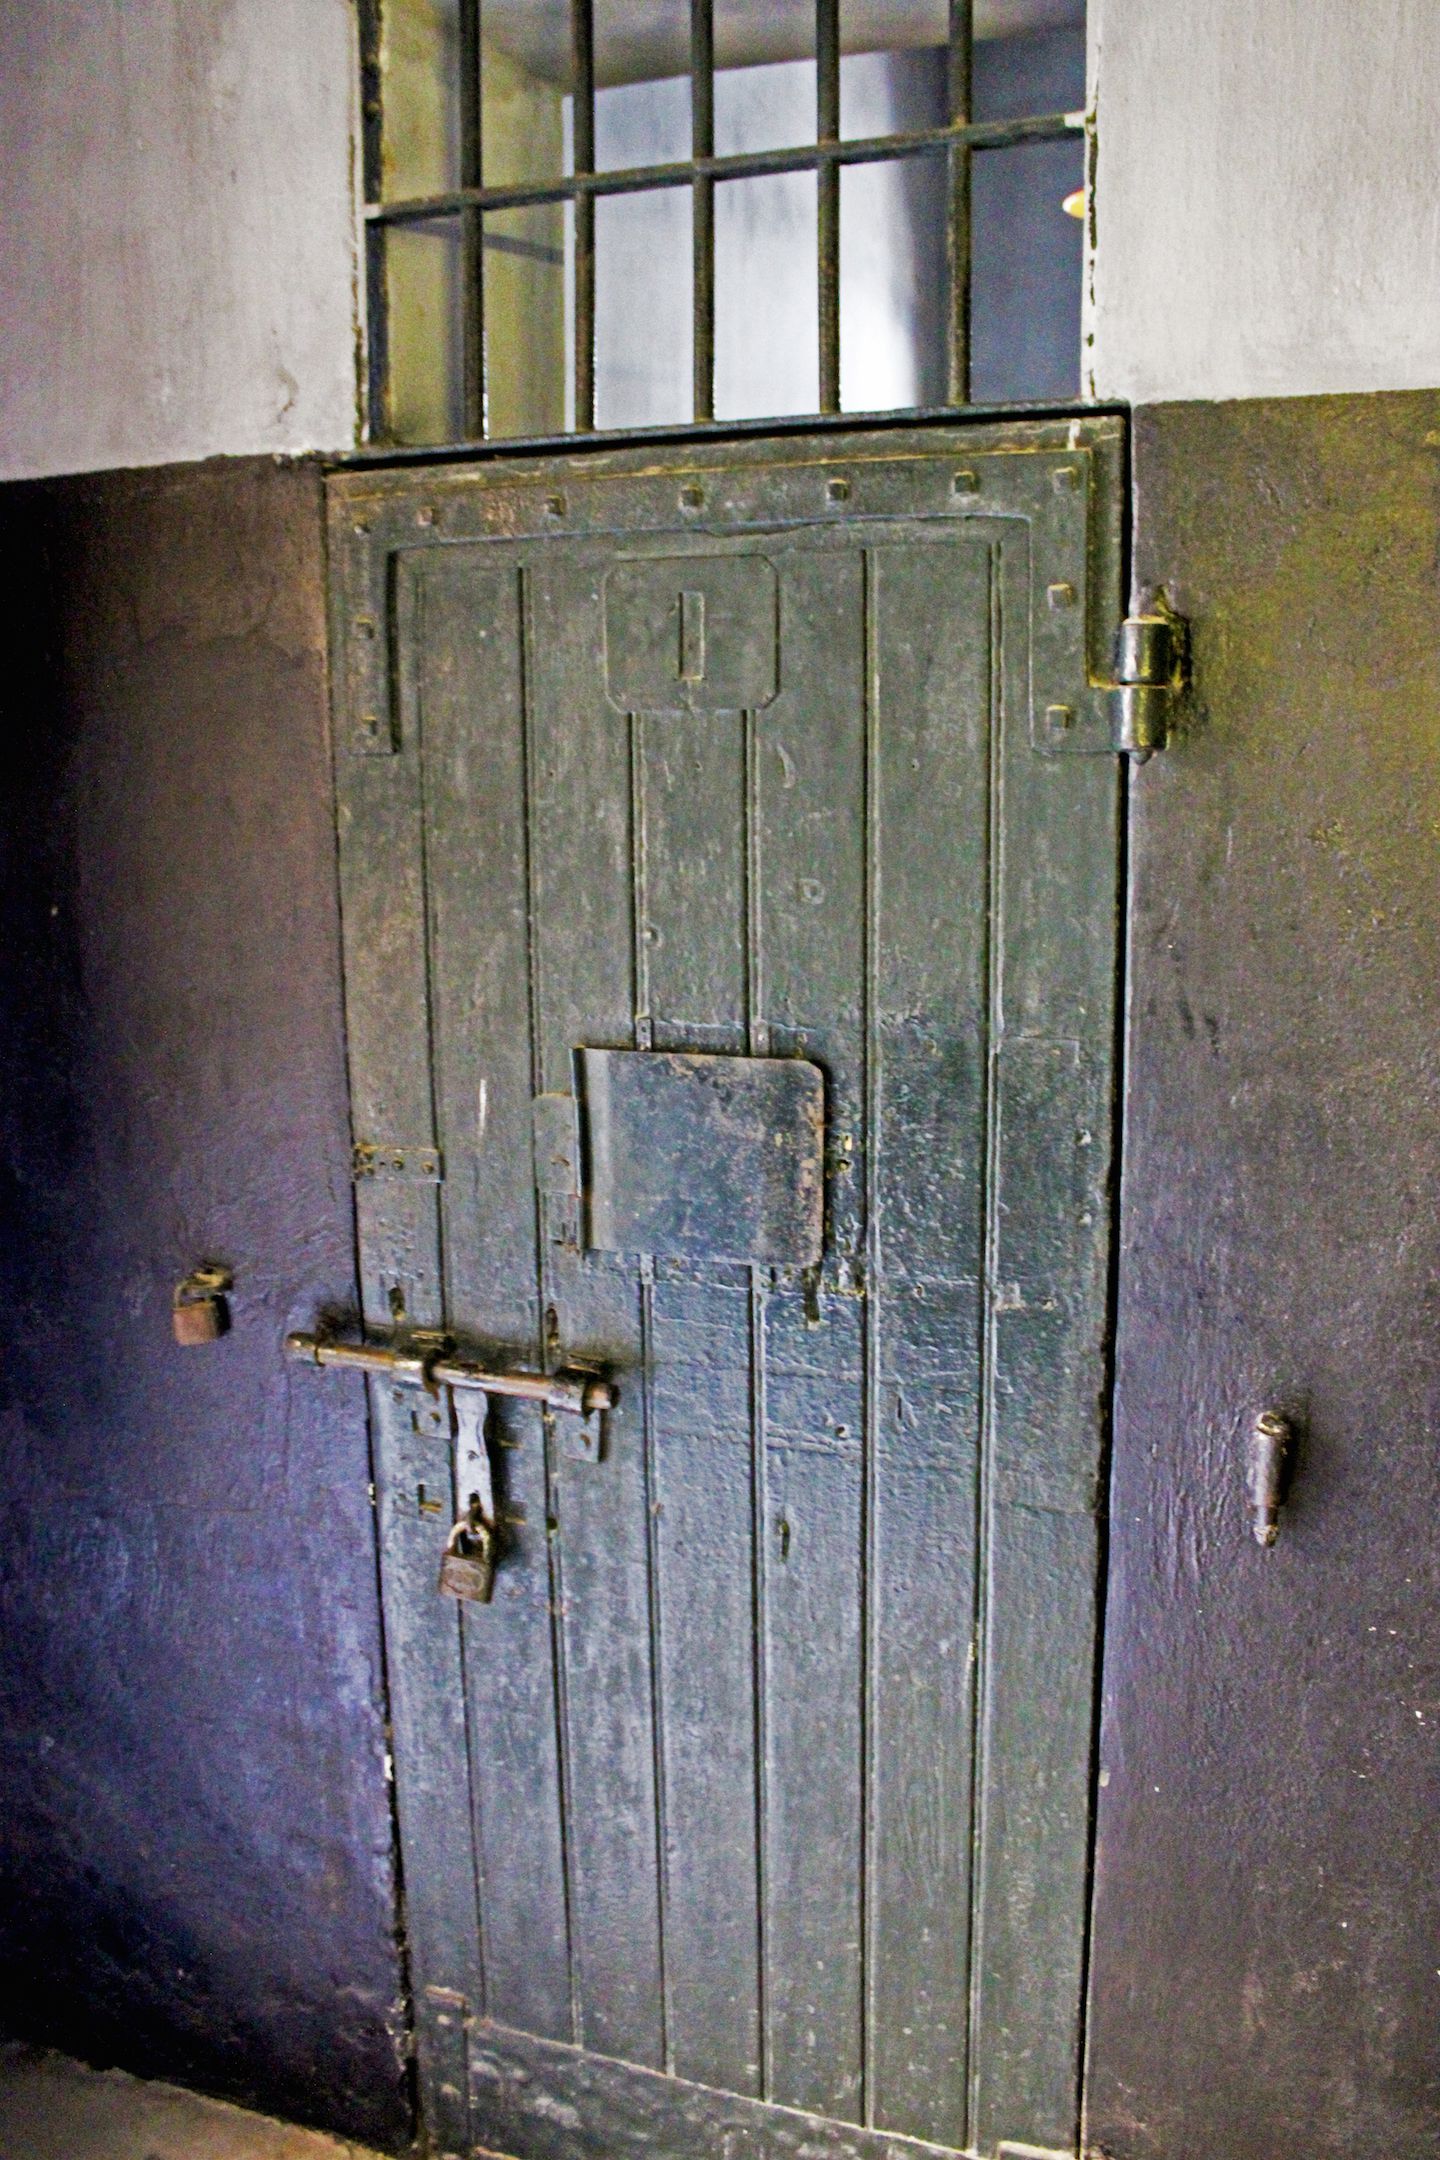 Door to the prisoners' cell at the Hoa Lo Prison